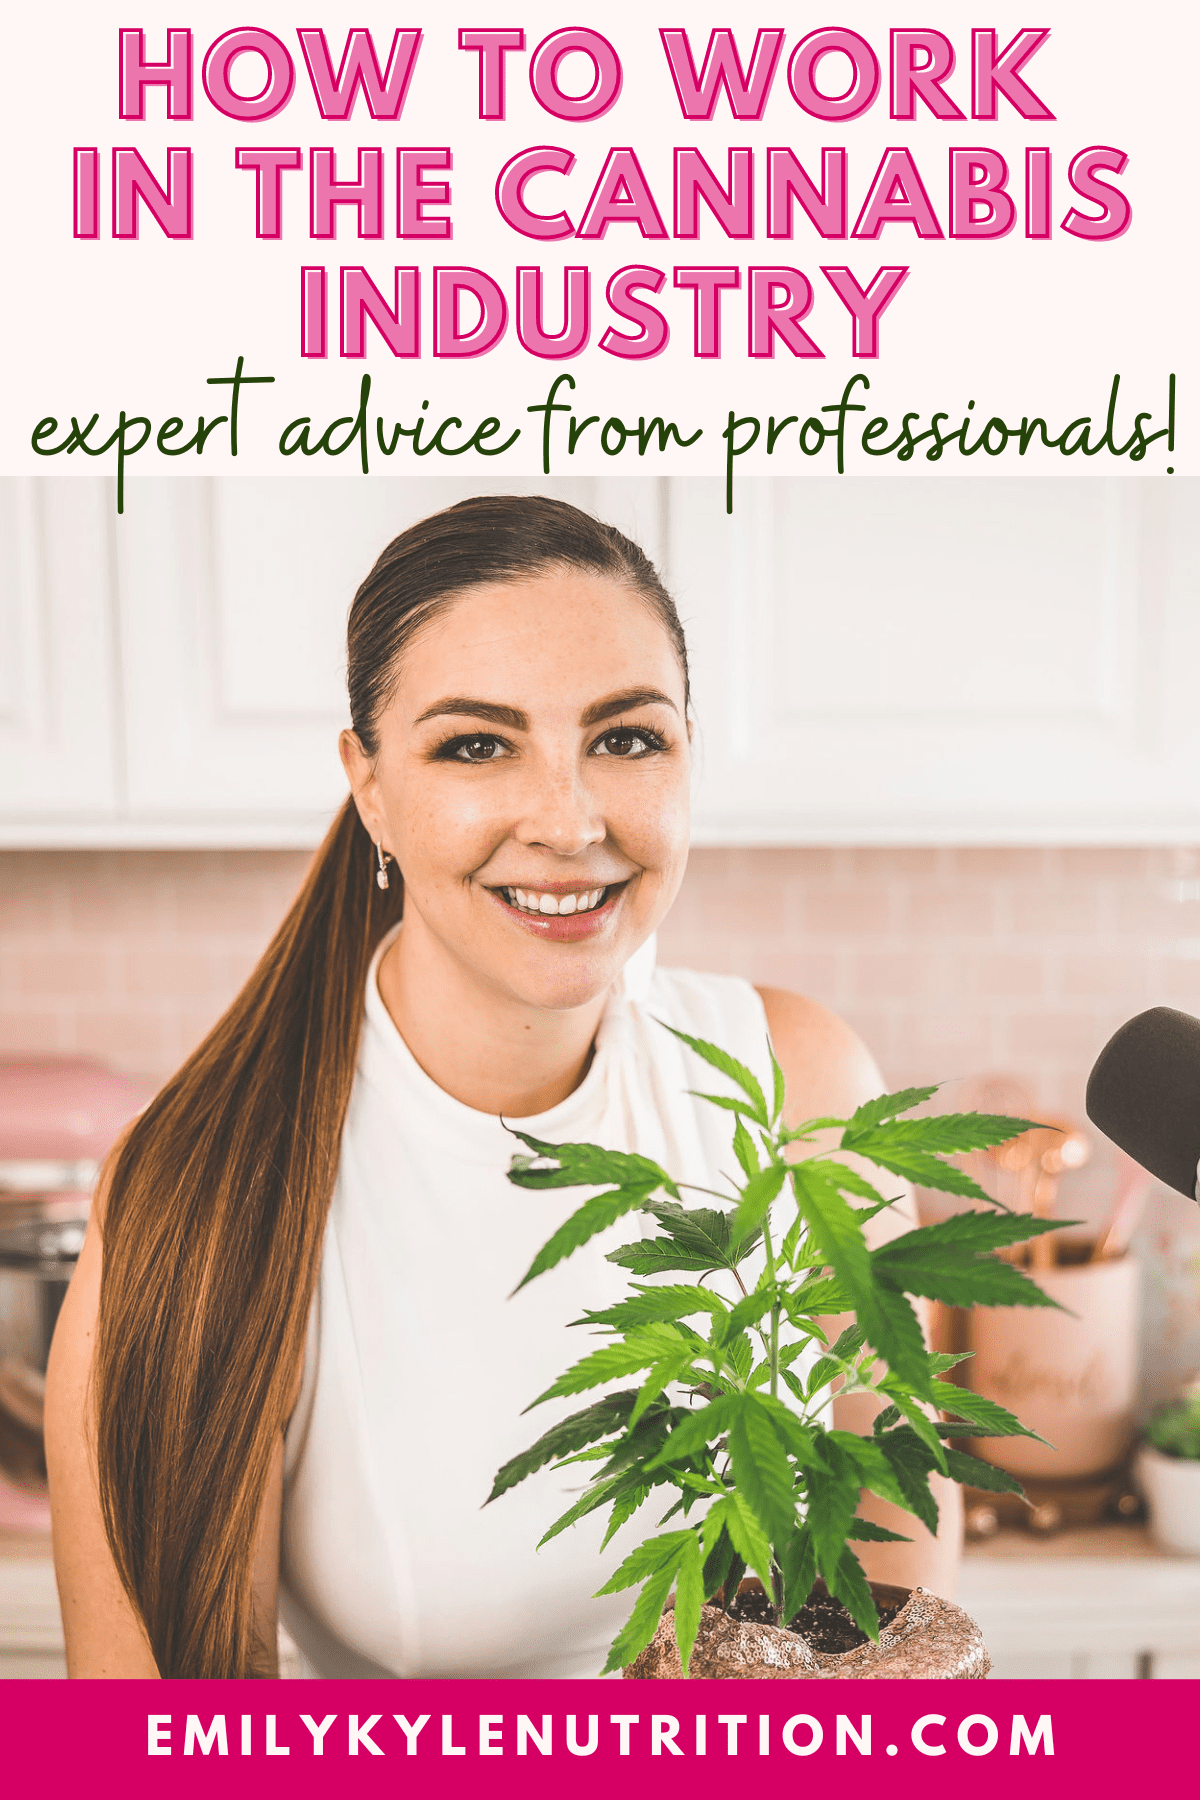 A picture of Emily Kyle with text that says How to work in the cannabis industry, expert advice from professionals.